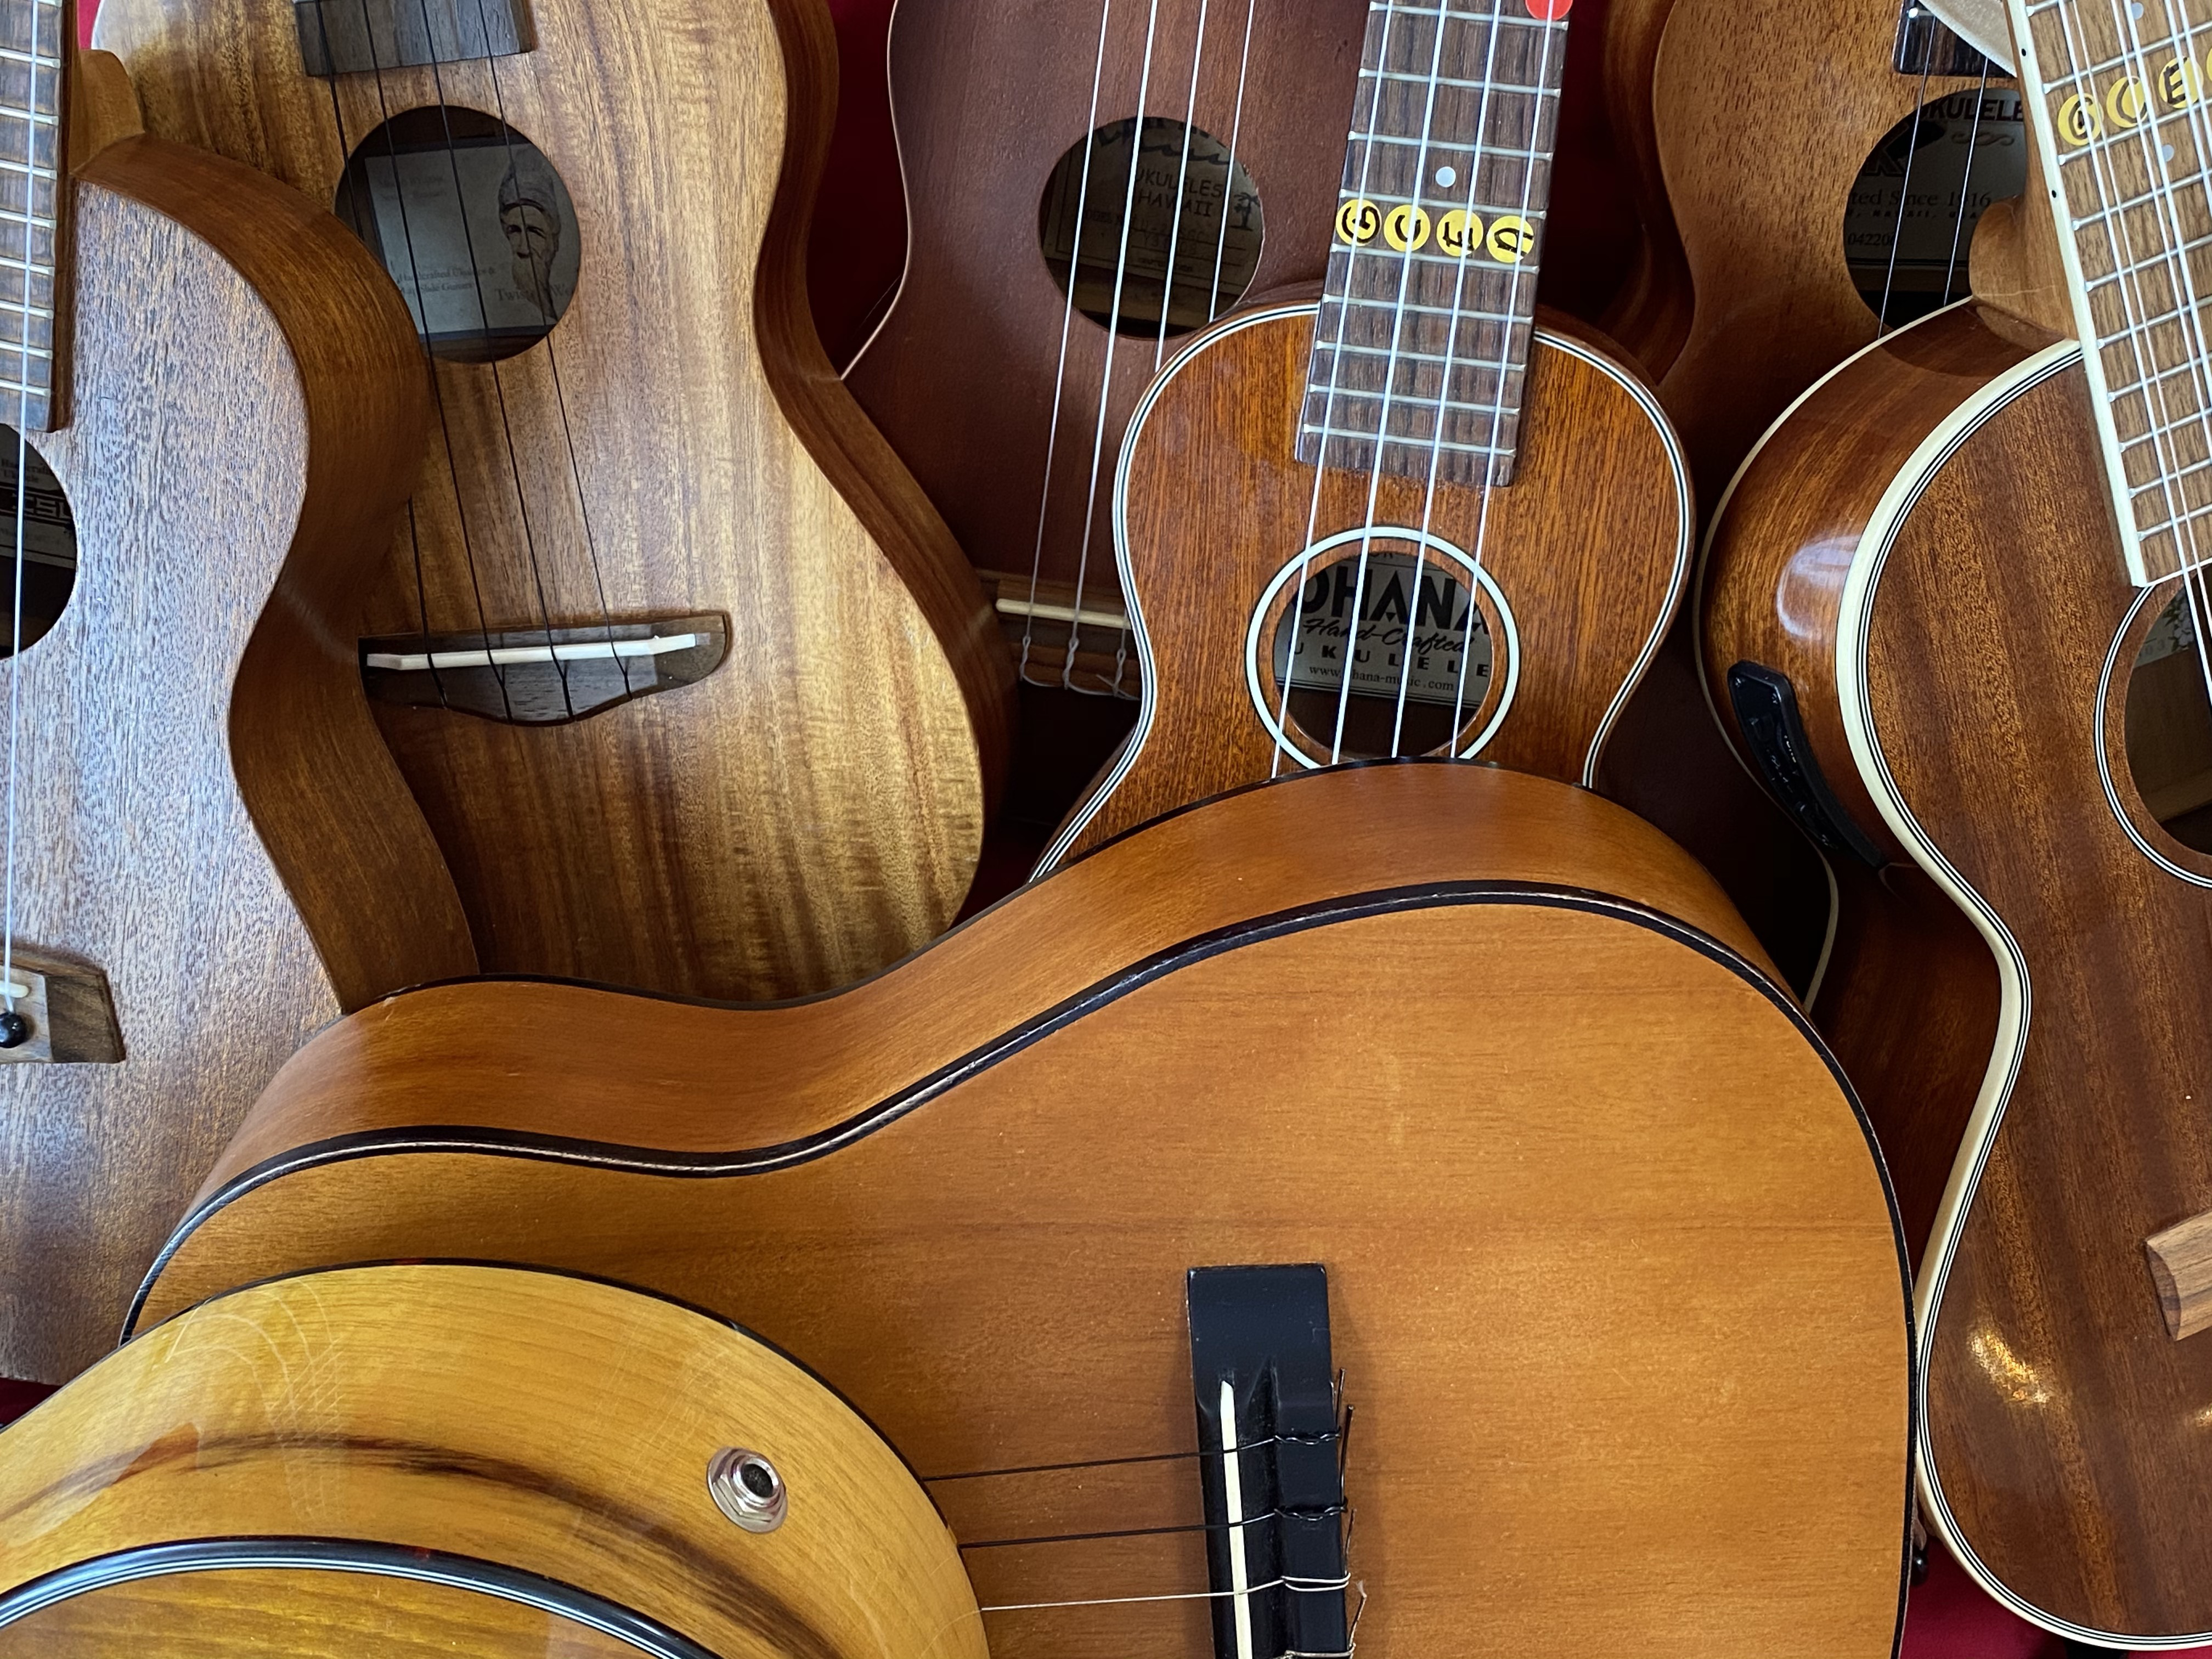 ukulele's with different wood types